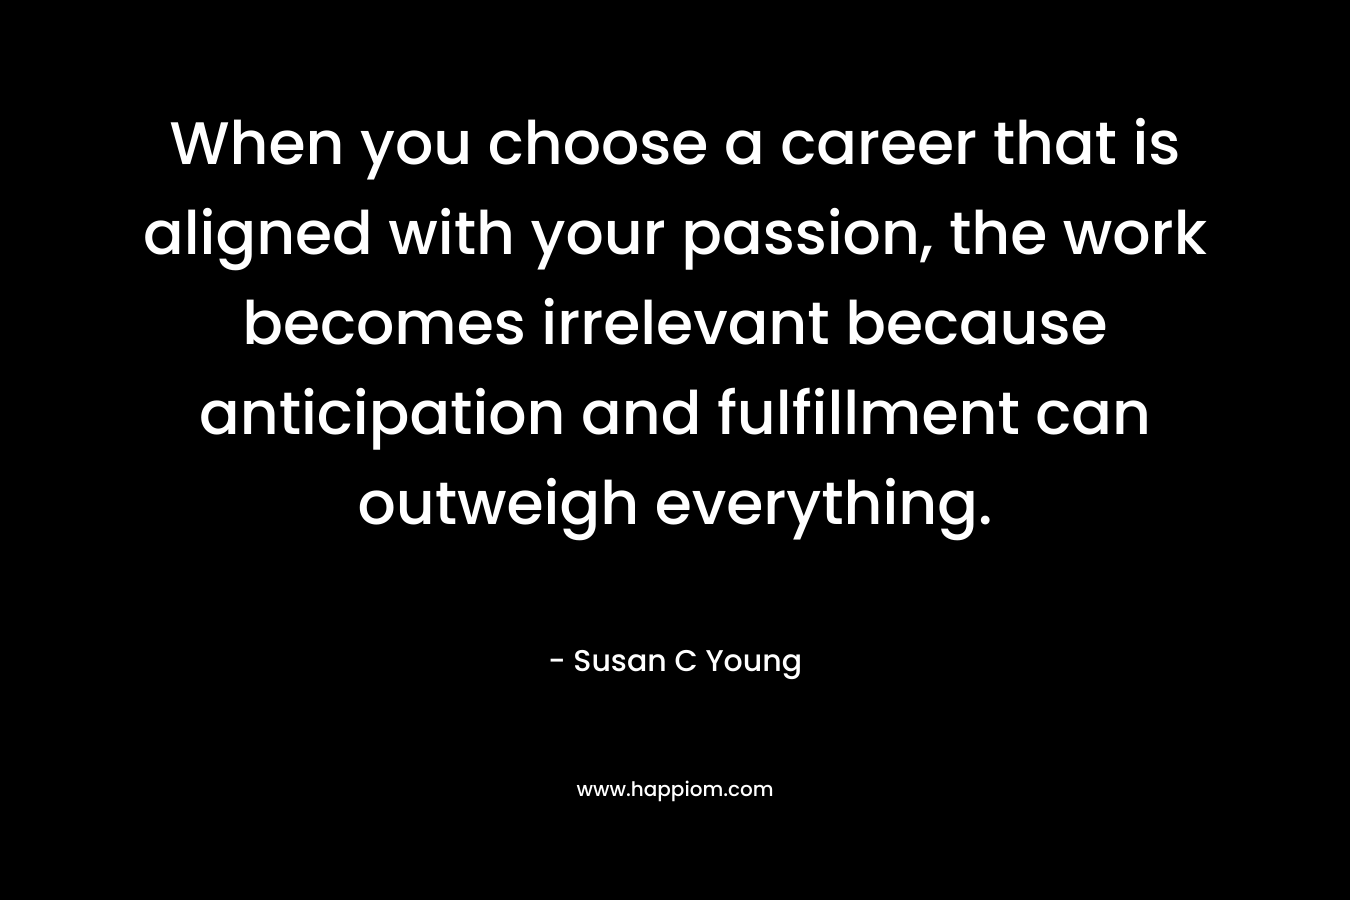 When you choose a career that is aligned with your passion, the work becomes irrelevant because anticipation and fulfillment can outweigh everything.